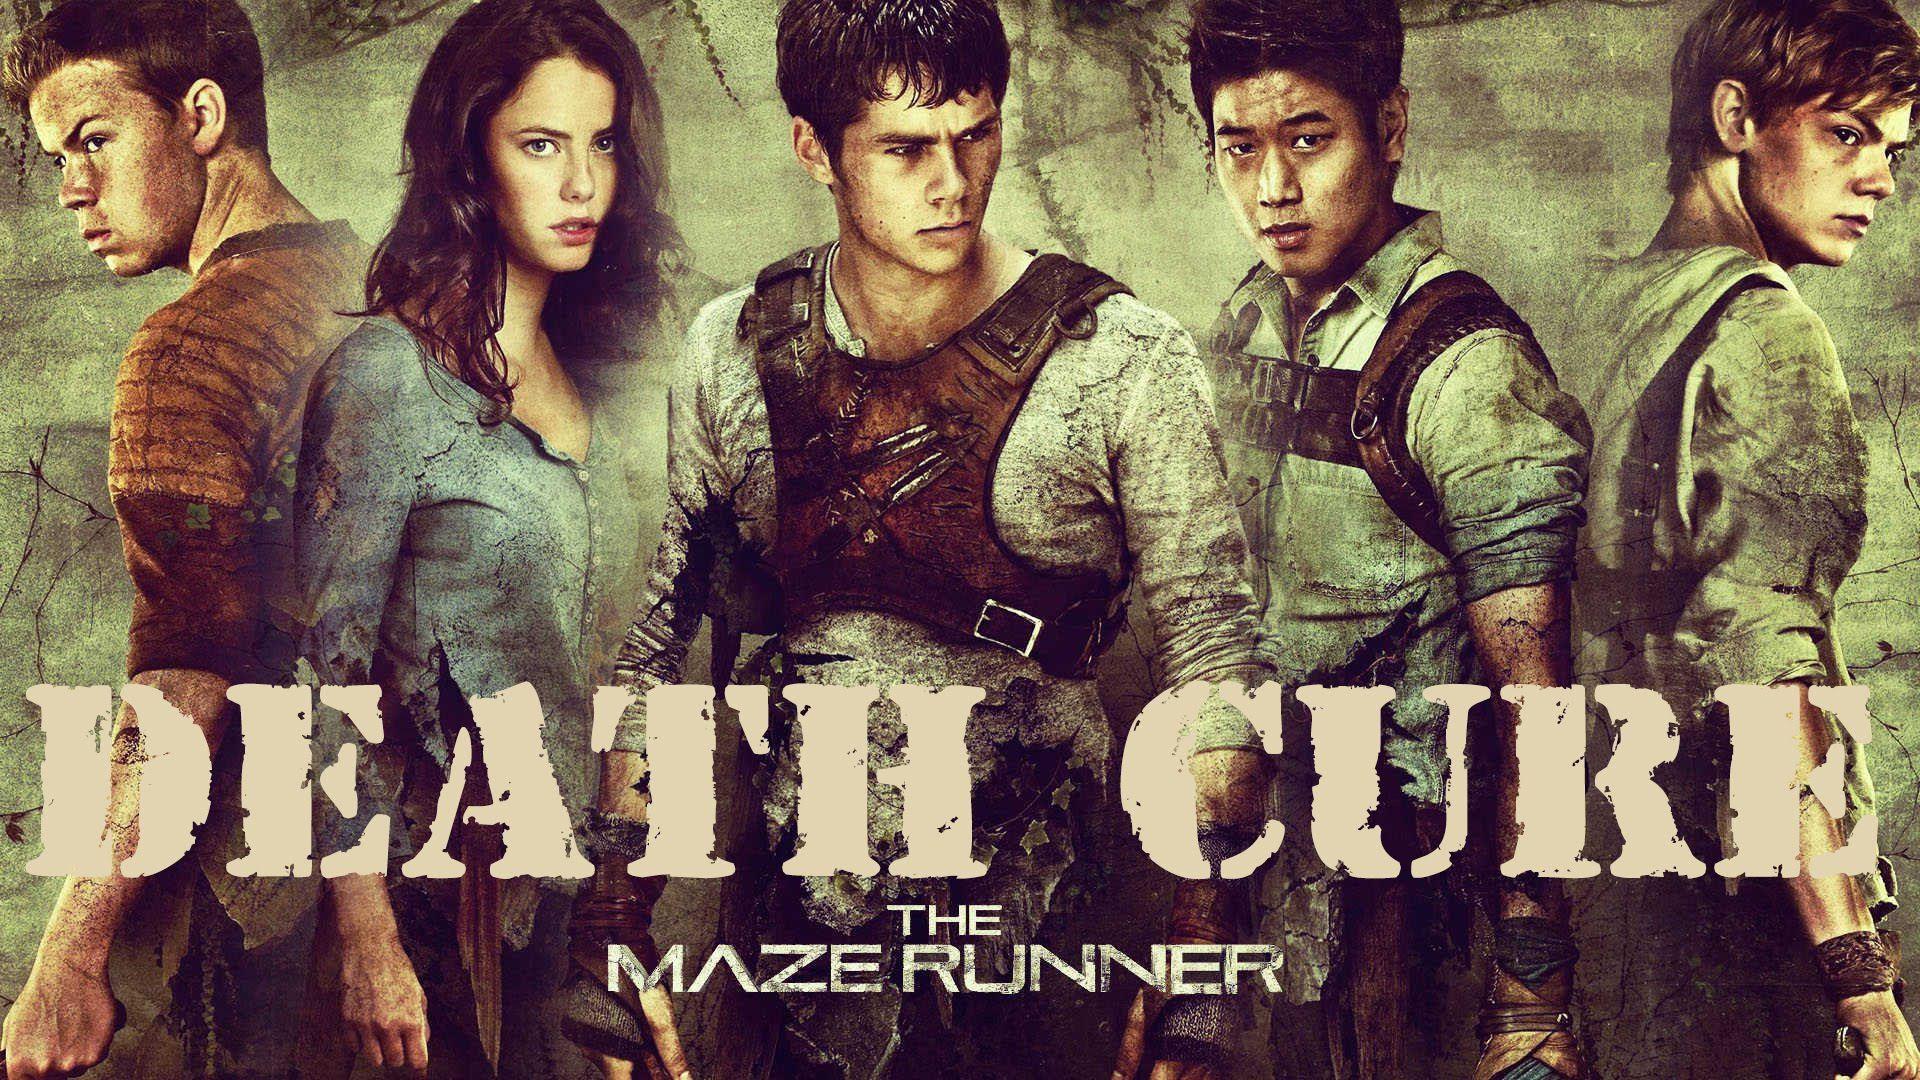 The Maze Runner 3, The Death Cure (Trailer)